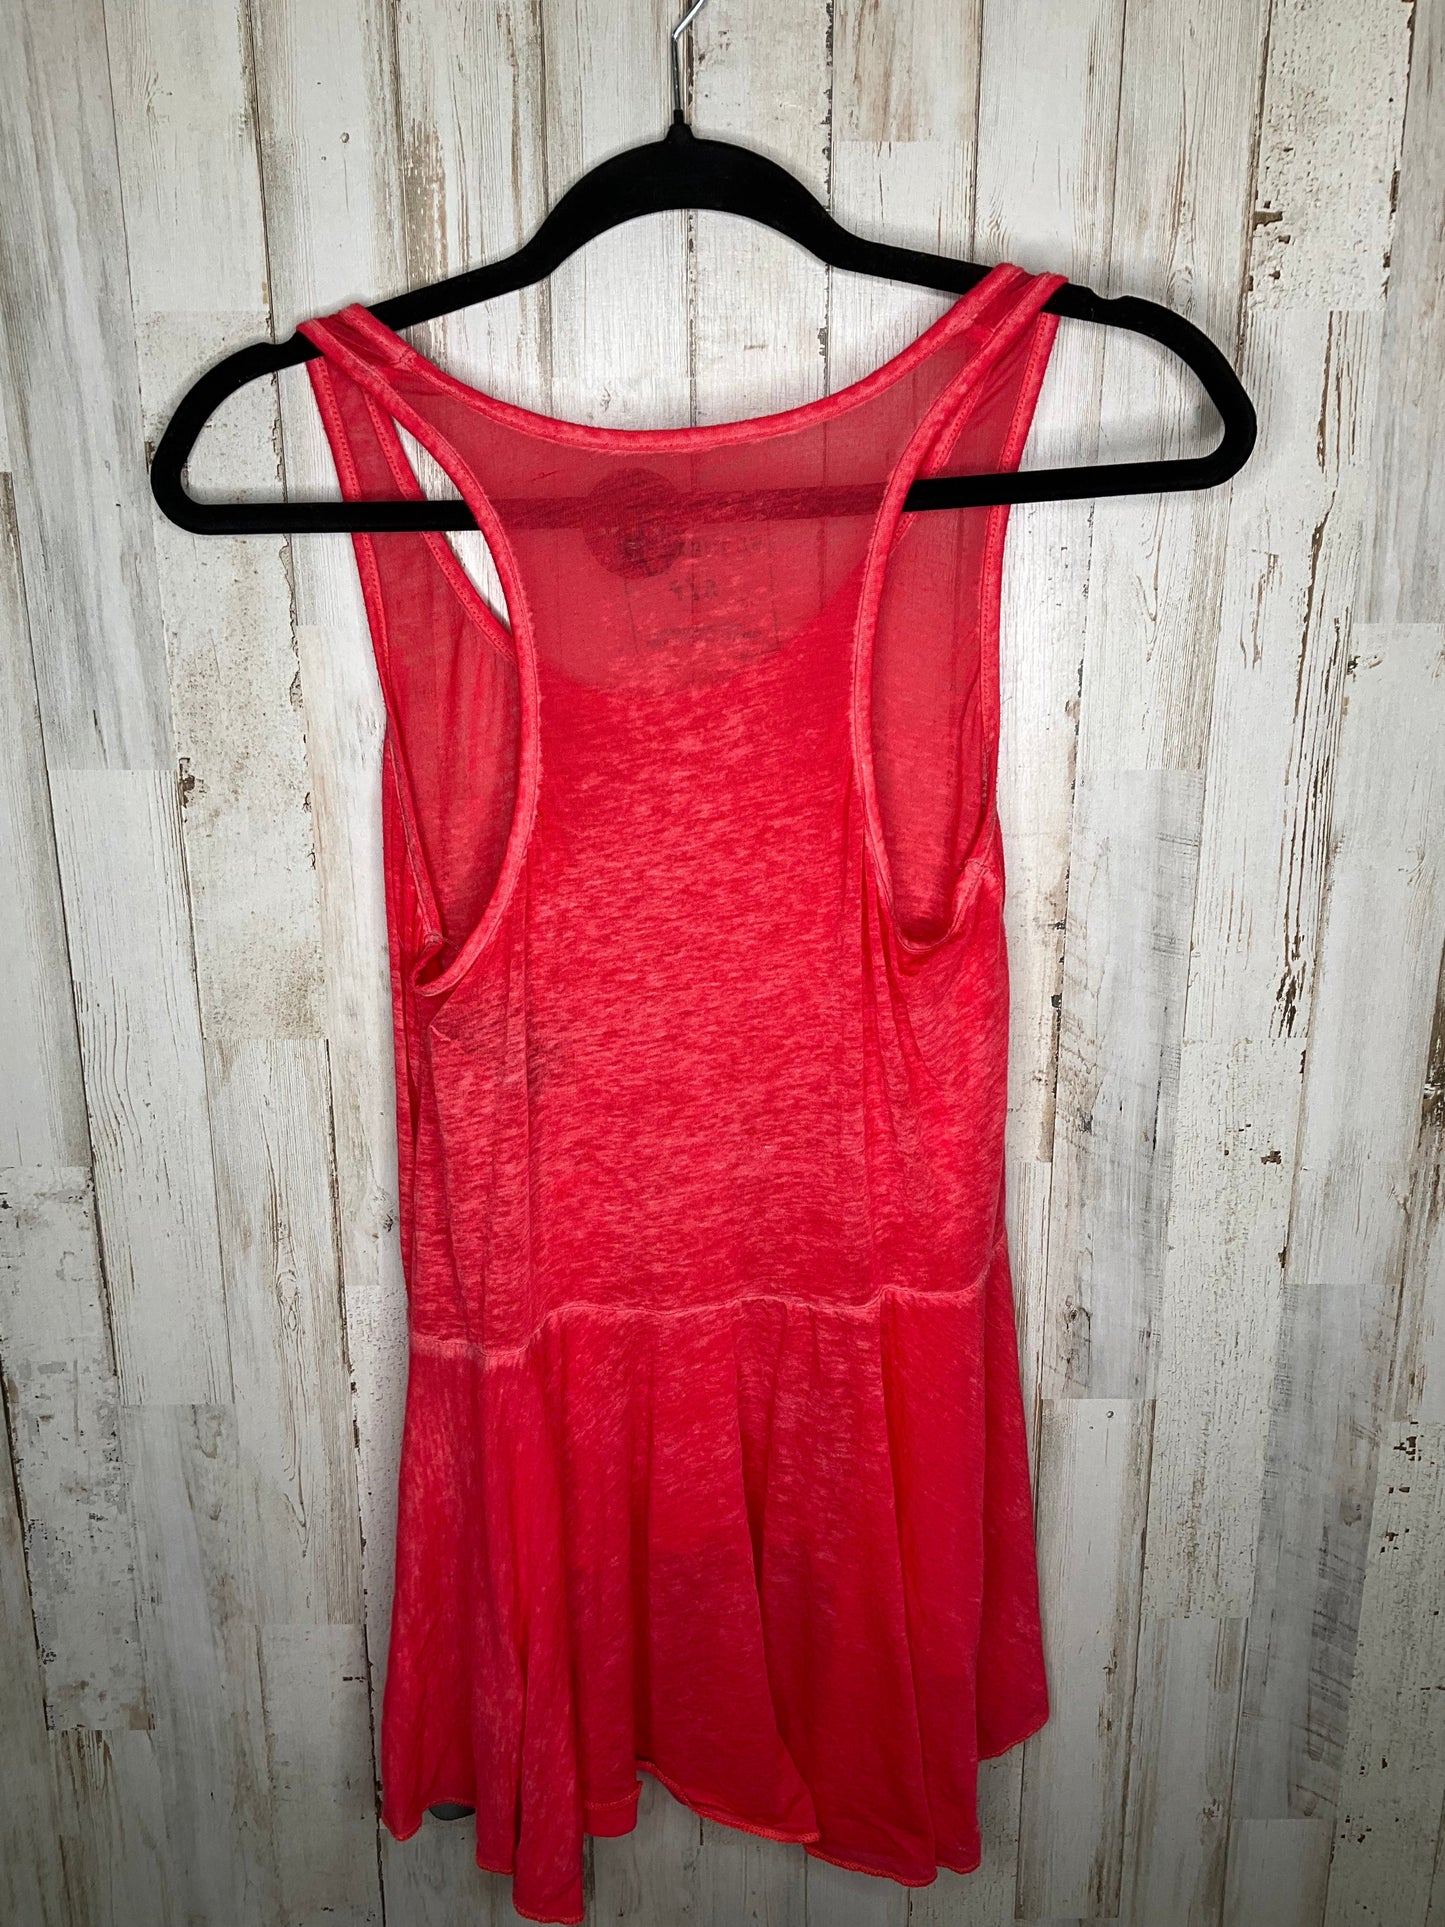 Red Top Sleeveless We The Free, Size M